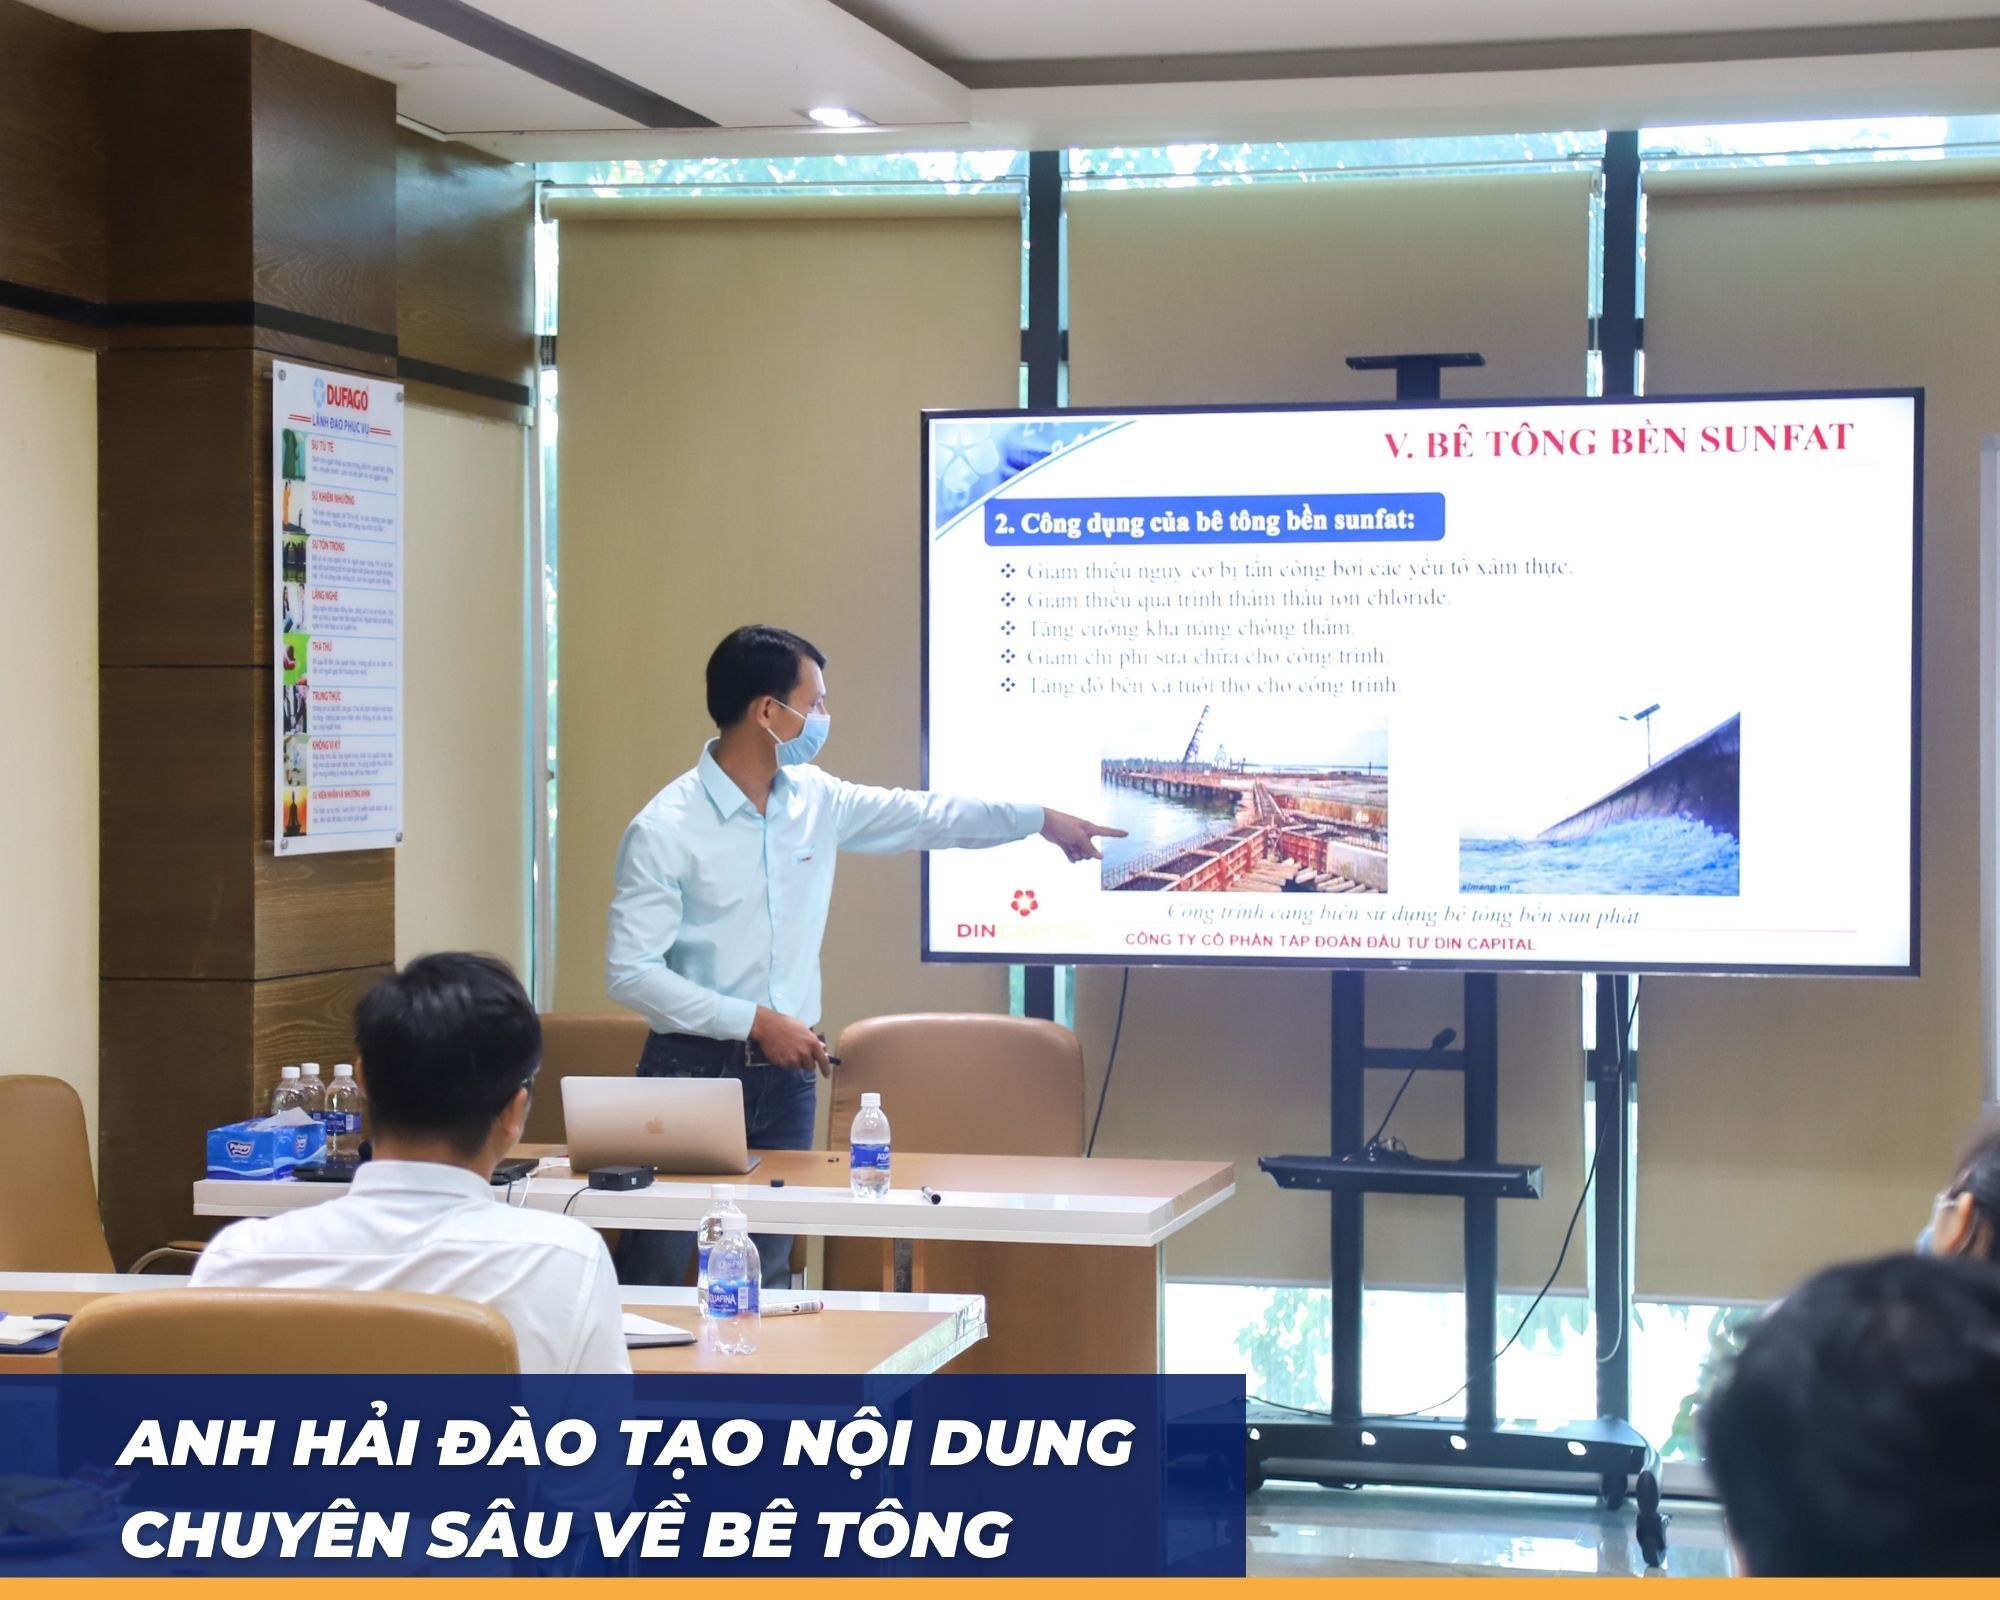 Mr. Do Ngoc Hai trained in-depth content of concrete types 